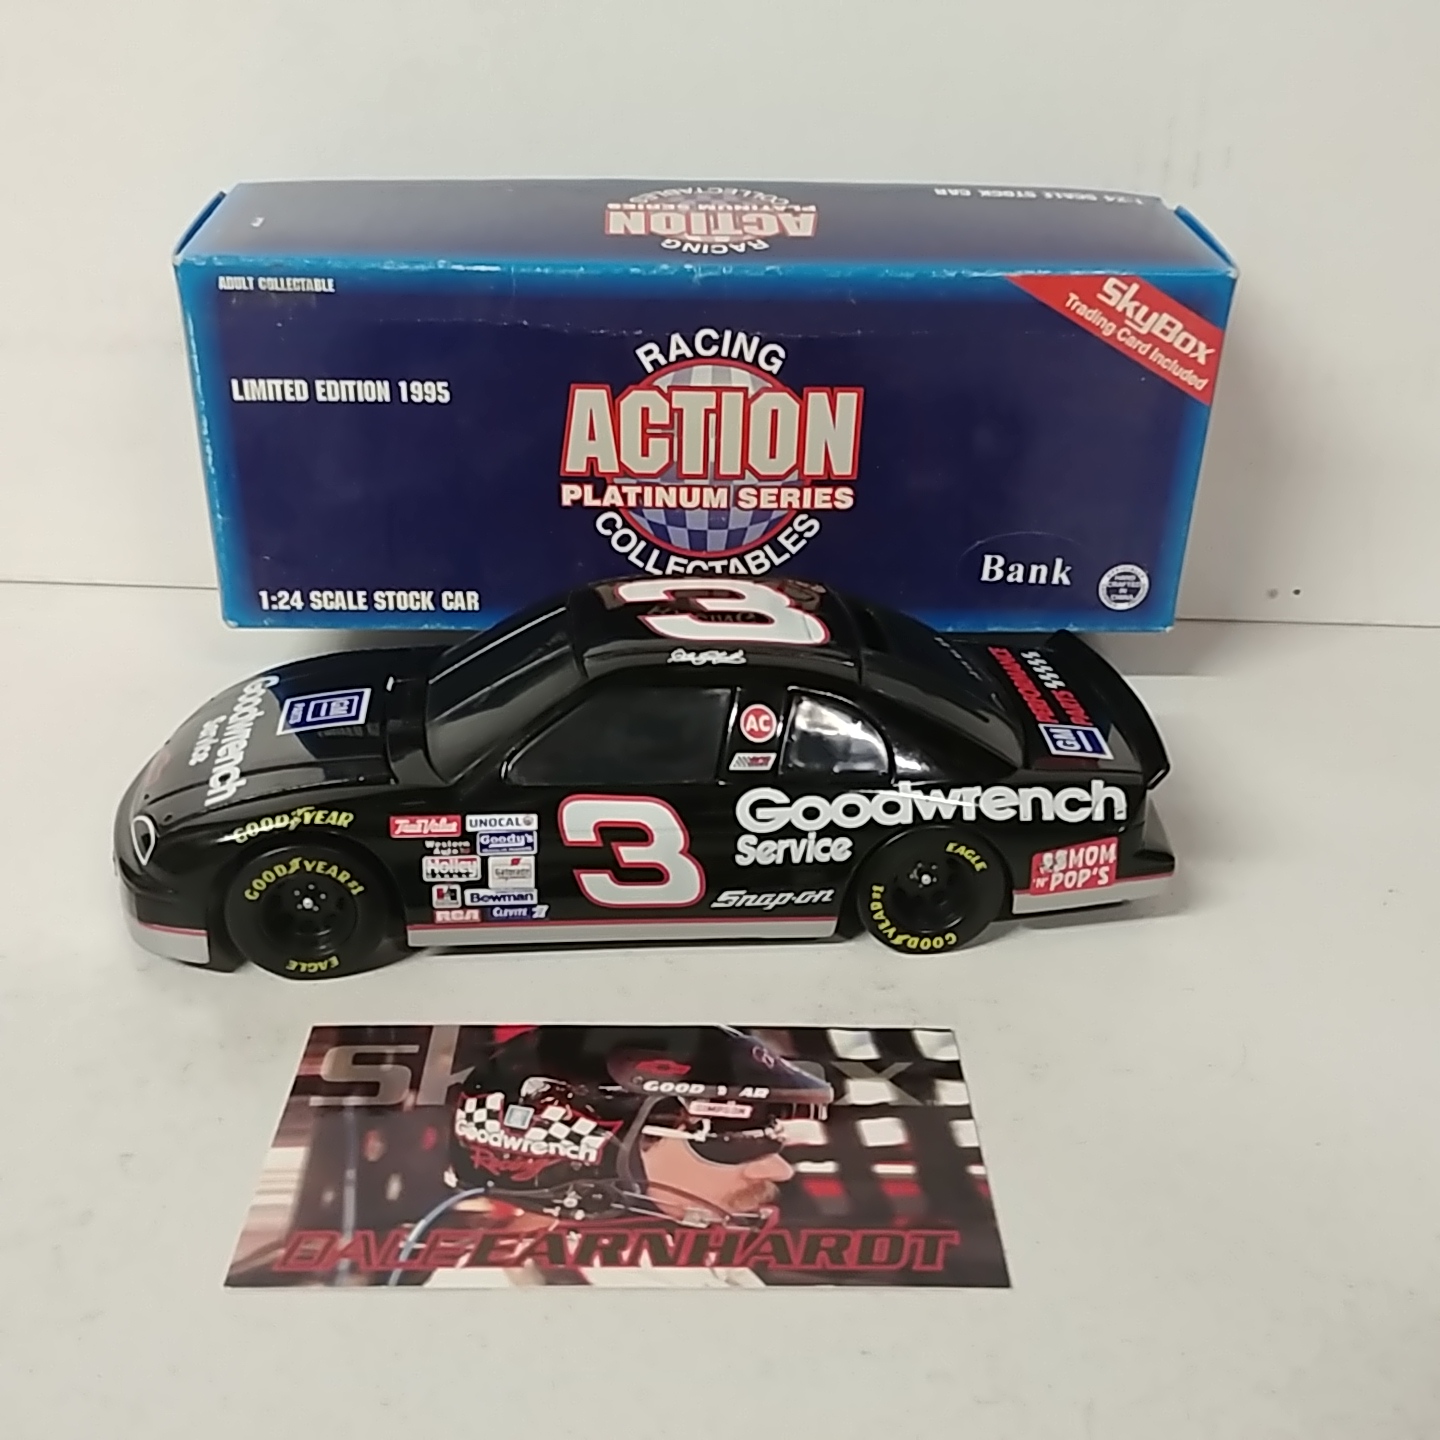 1995 Dale Earnhardt 1/24th Goodwrench "with headlight rings" b/w bank